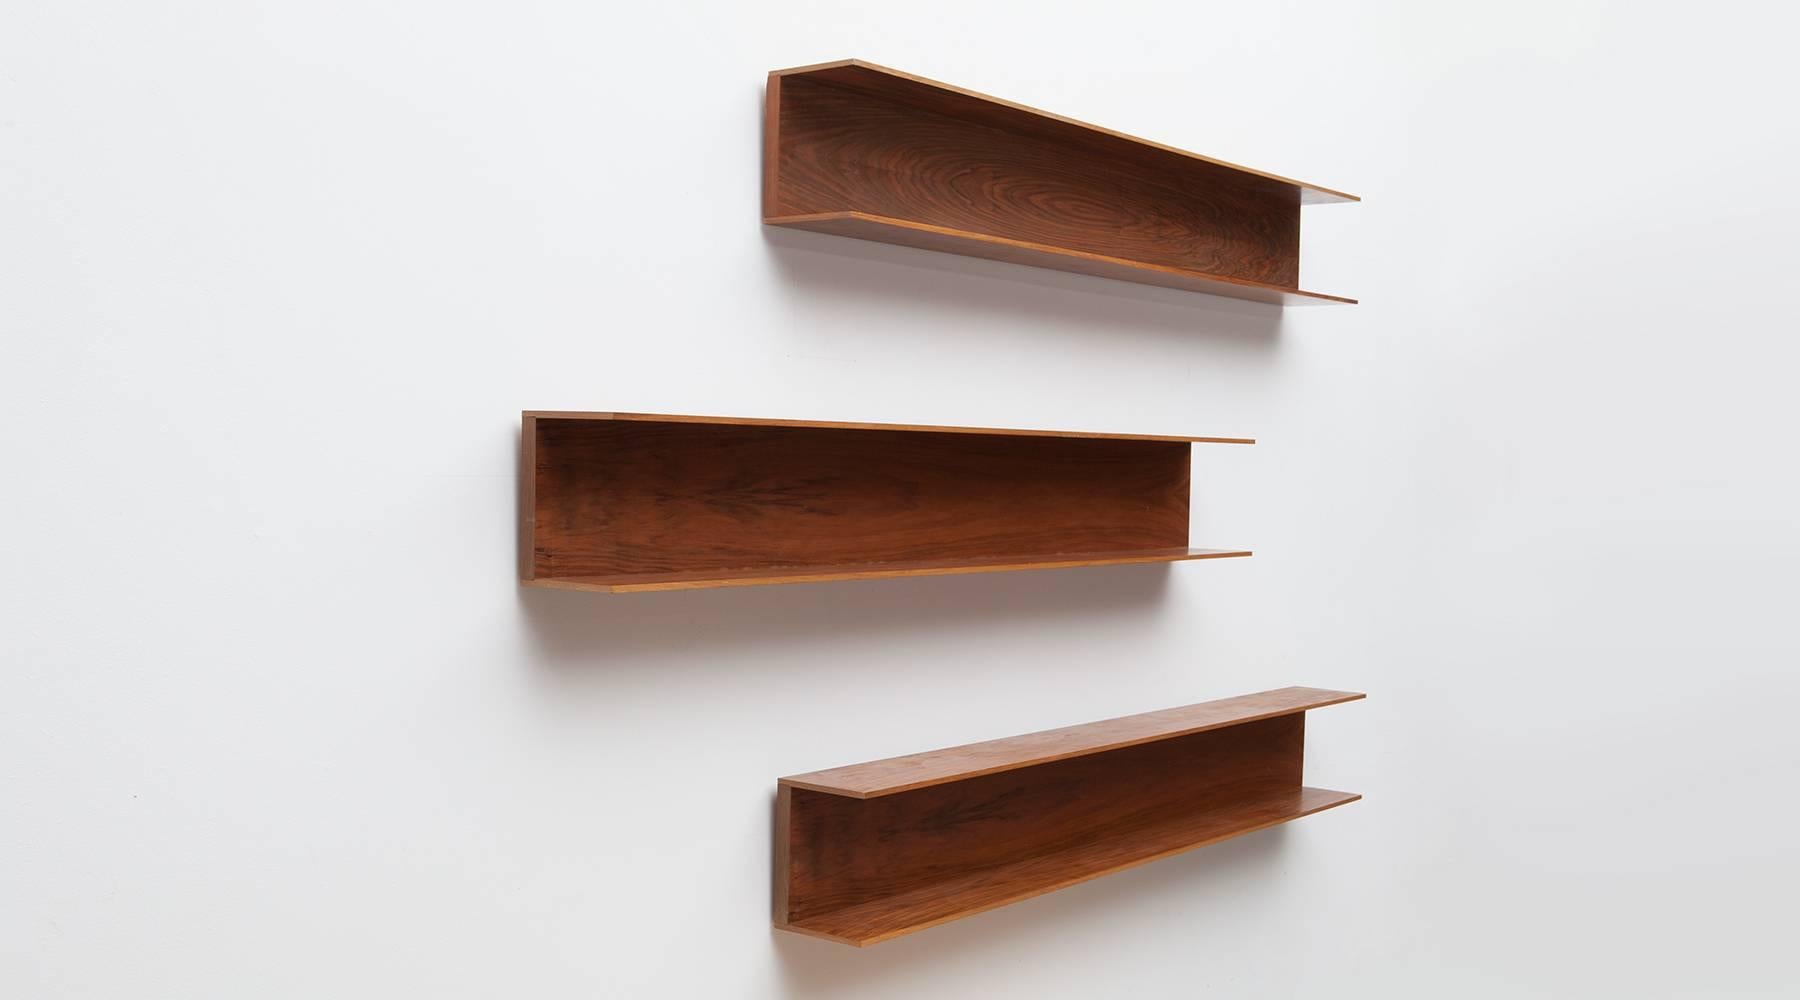 Set of three wall shelves designed by Walter Wirtz in wood. U-shaped structure in minimalistic German design from the early 1960s. The shelves are reworked and comes in very good condition. Manufactured by Wilhelm Renz.